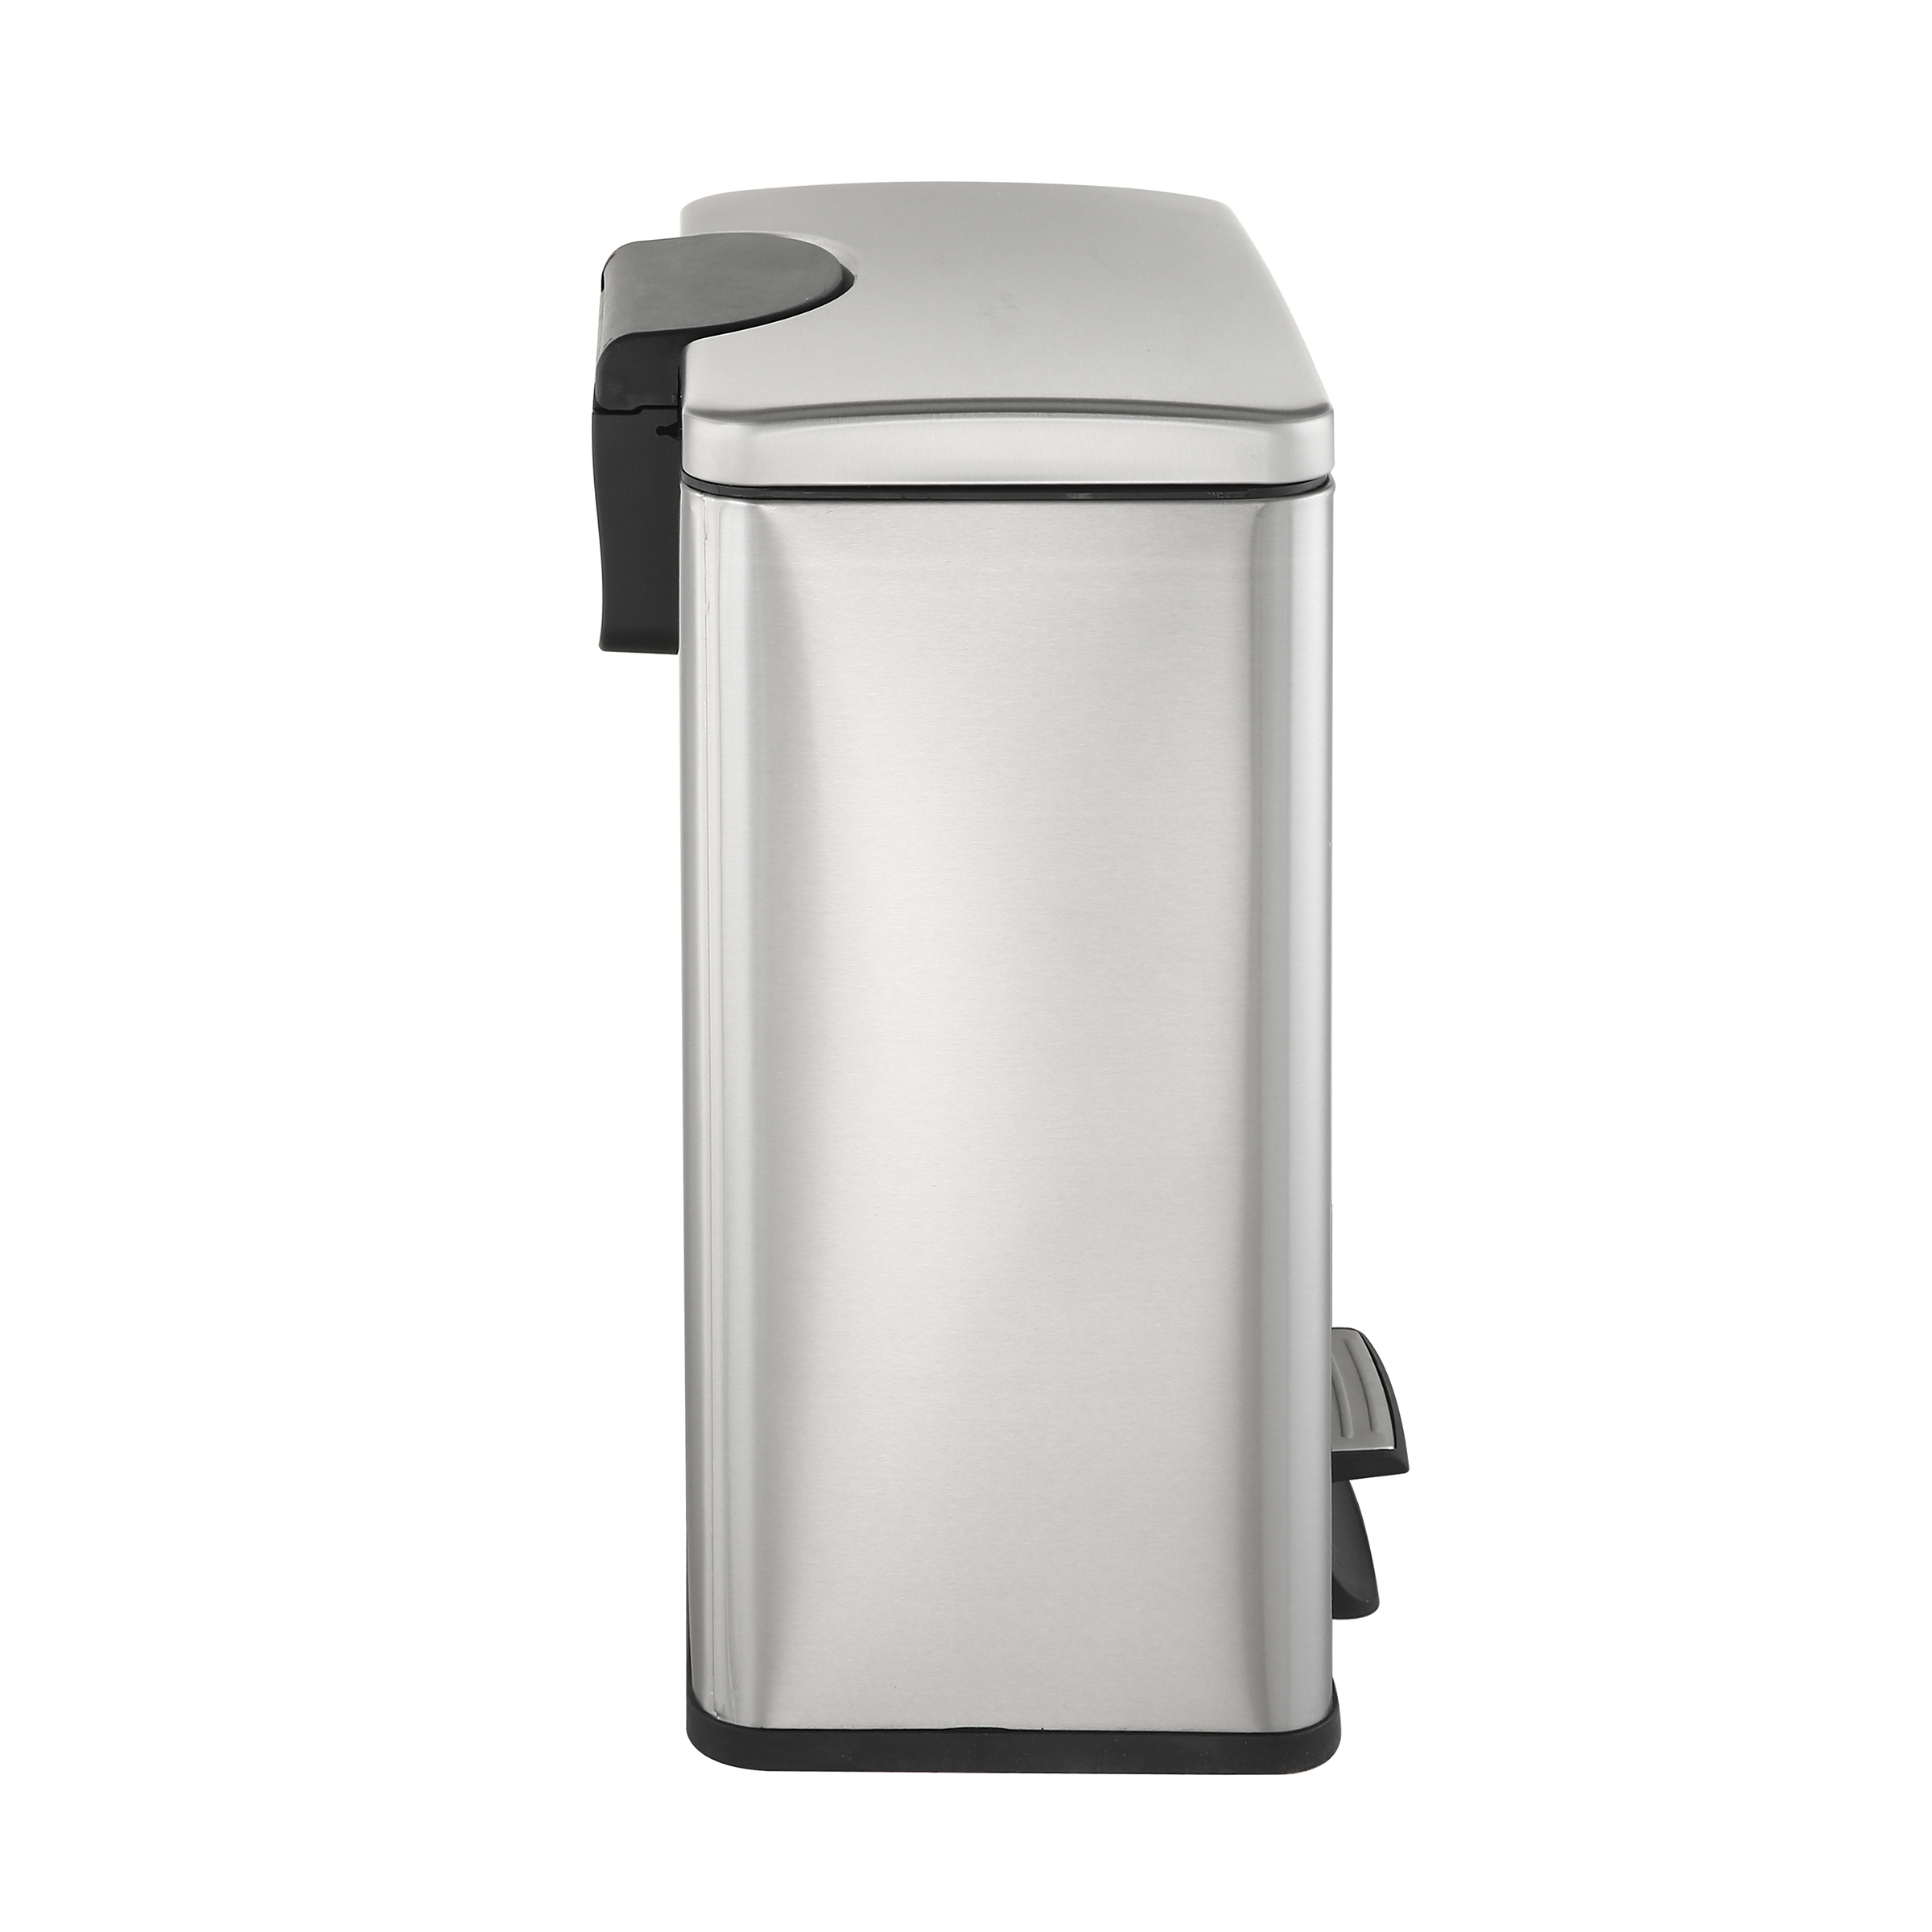 Better Homes & Gardens 10.5Gal /40L Stainless Steel Rectangle Waste Can with Lid - image 5 of 9